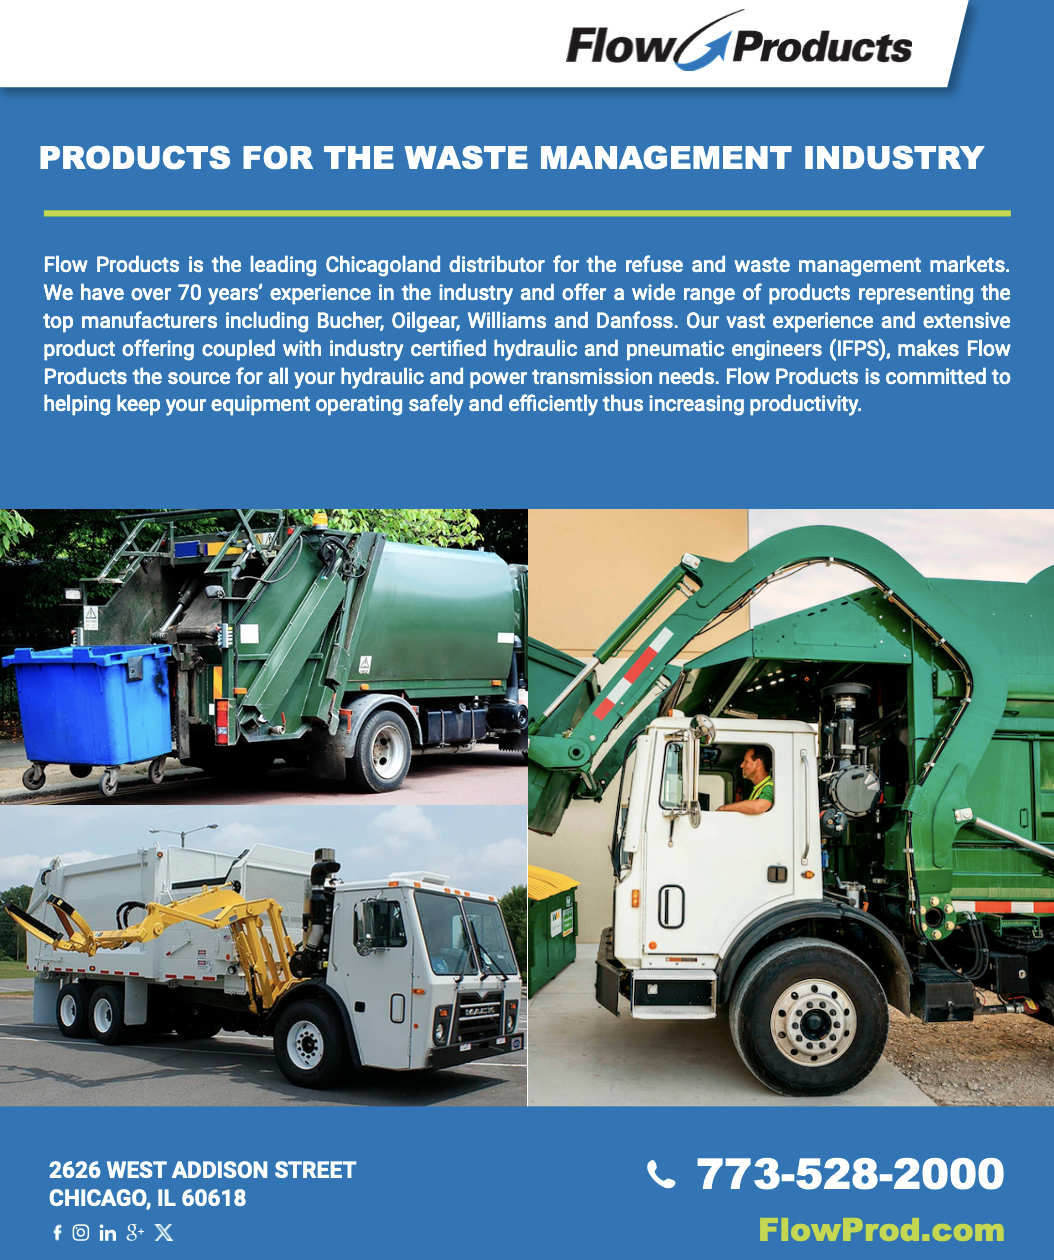 Flow Products is the leading Chicagoland distributor for the refuse and waste management markets.